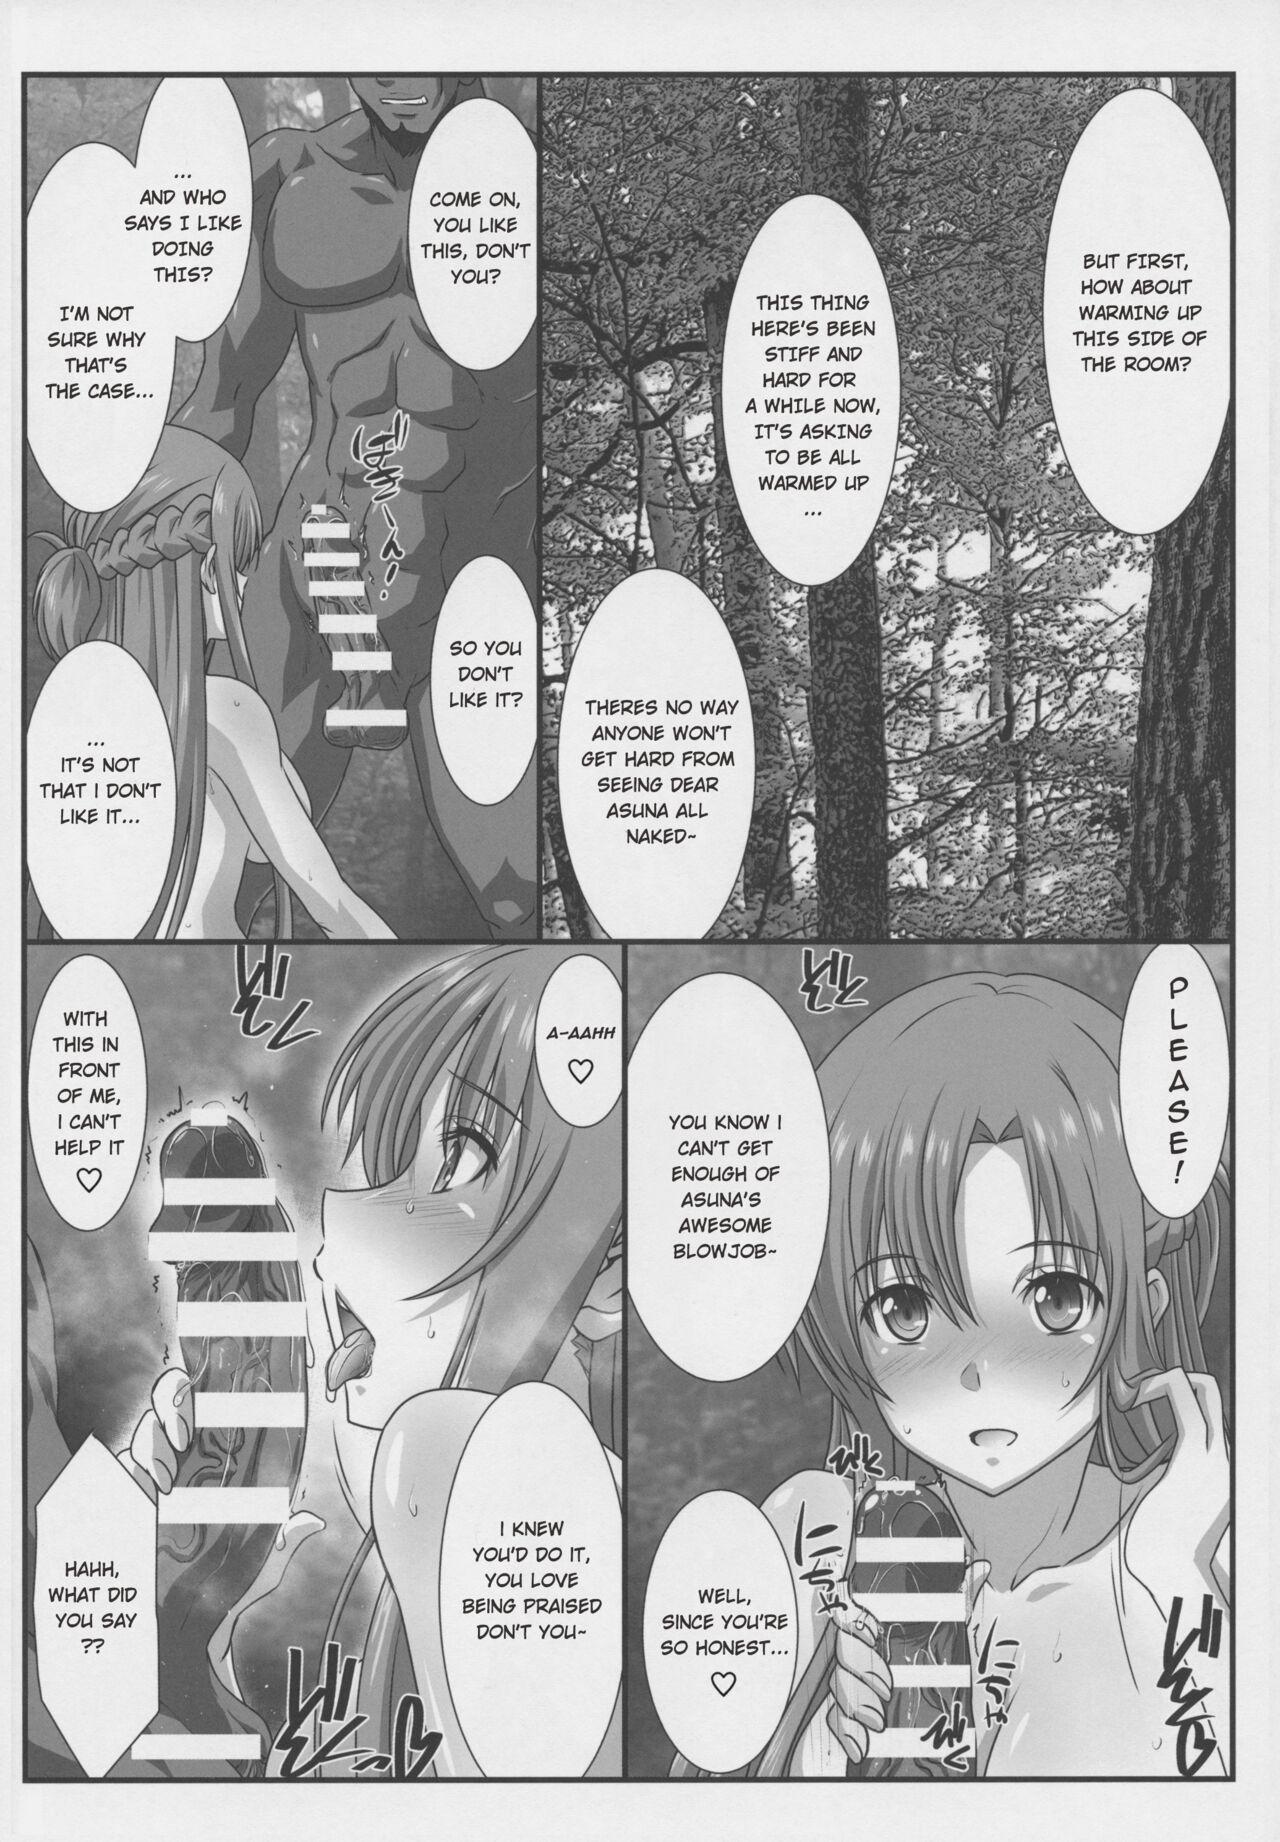 Gaystraight Astral Bout Ver. 45 - Sword art online Pau - Page 5